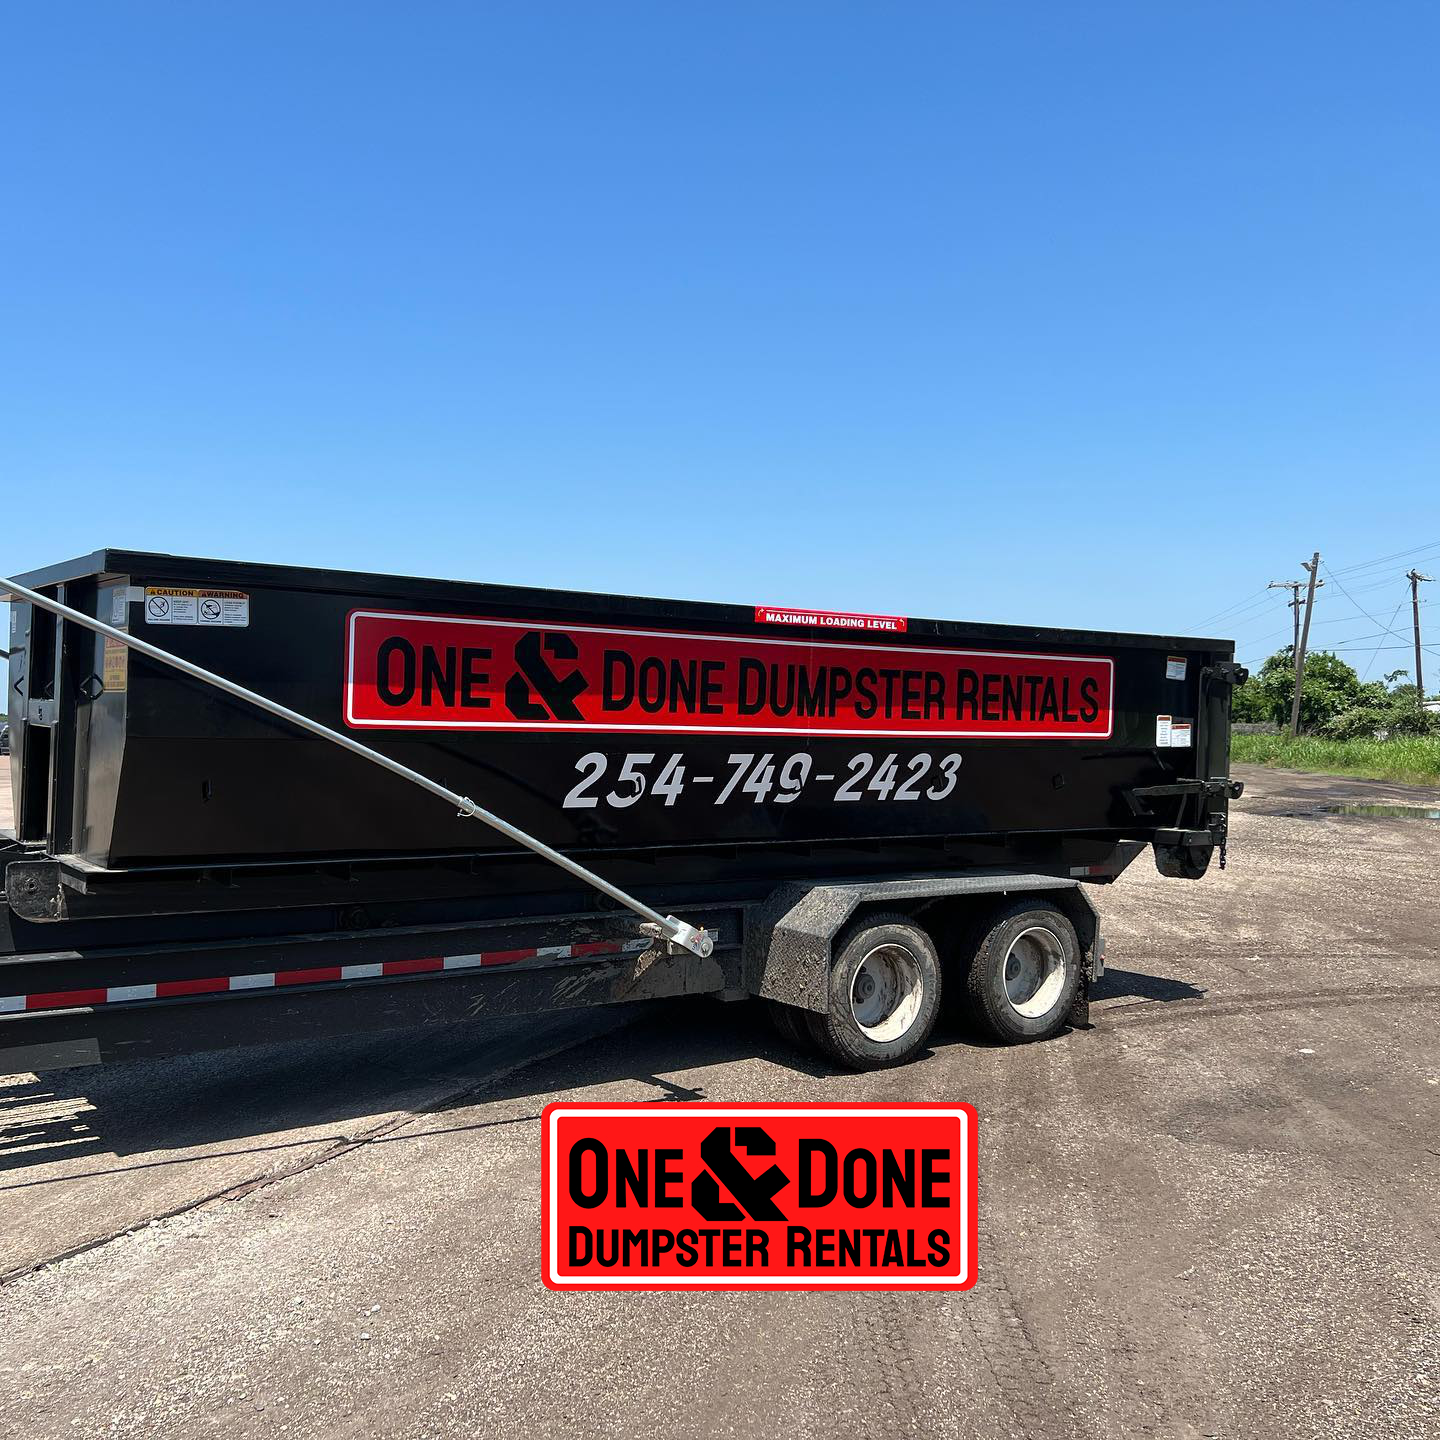 Residential Dumpster Rental One and Done Dumpster Rentals Marlin TX Near Me